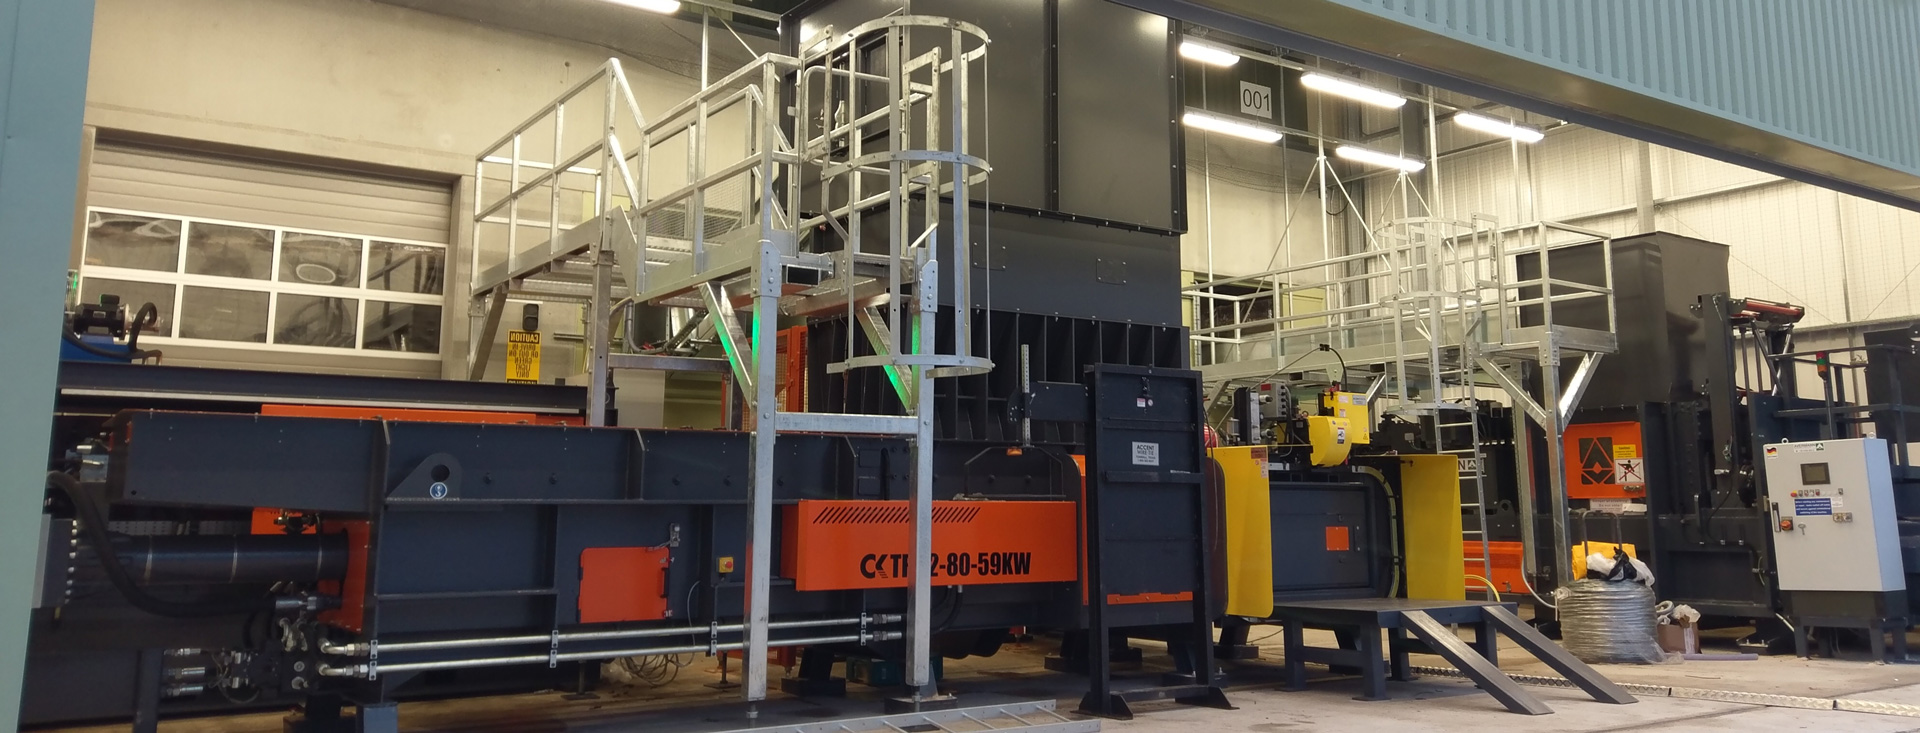 Fully automatic baler installation